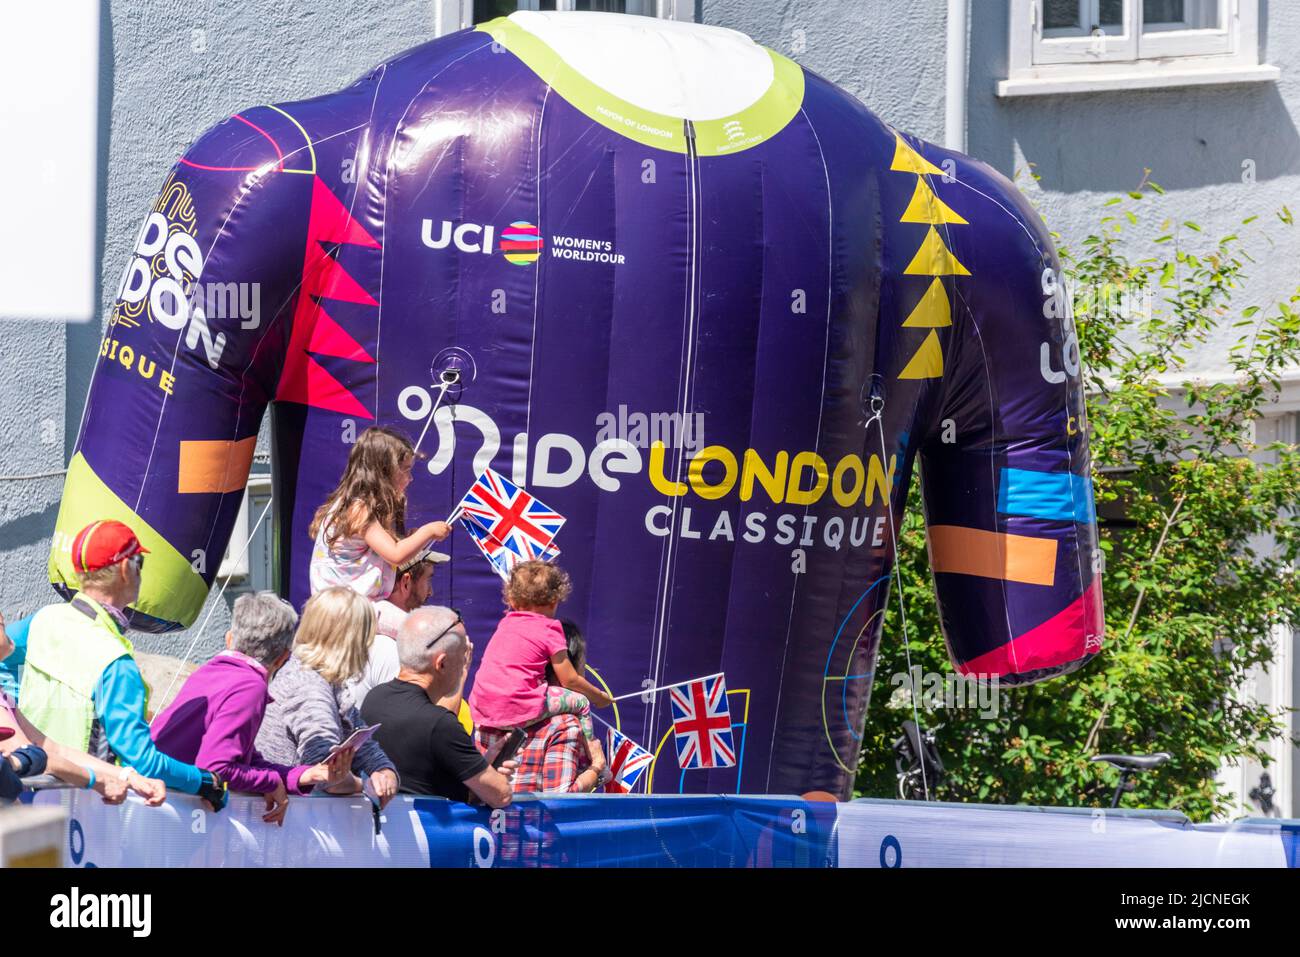 Advertising inflatable at the RideLondon Classique women's cycle race, with young supporters waving Union Jack flags. Children. Girls Stock Photo